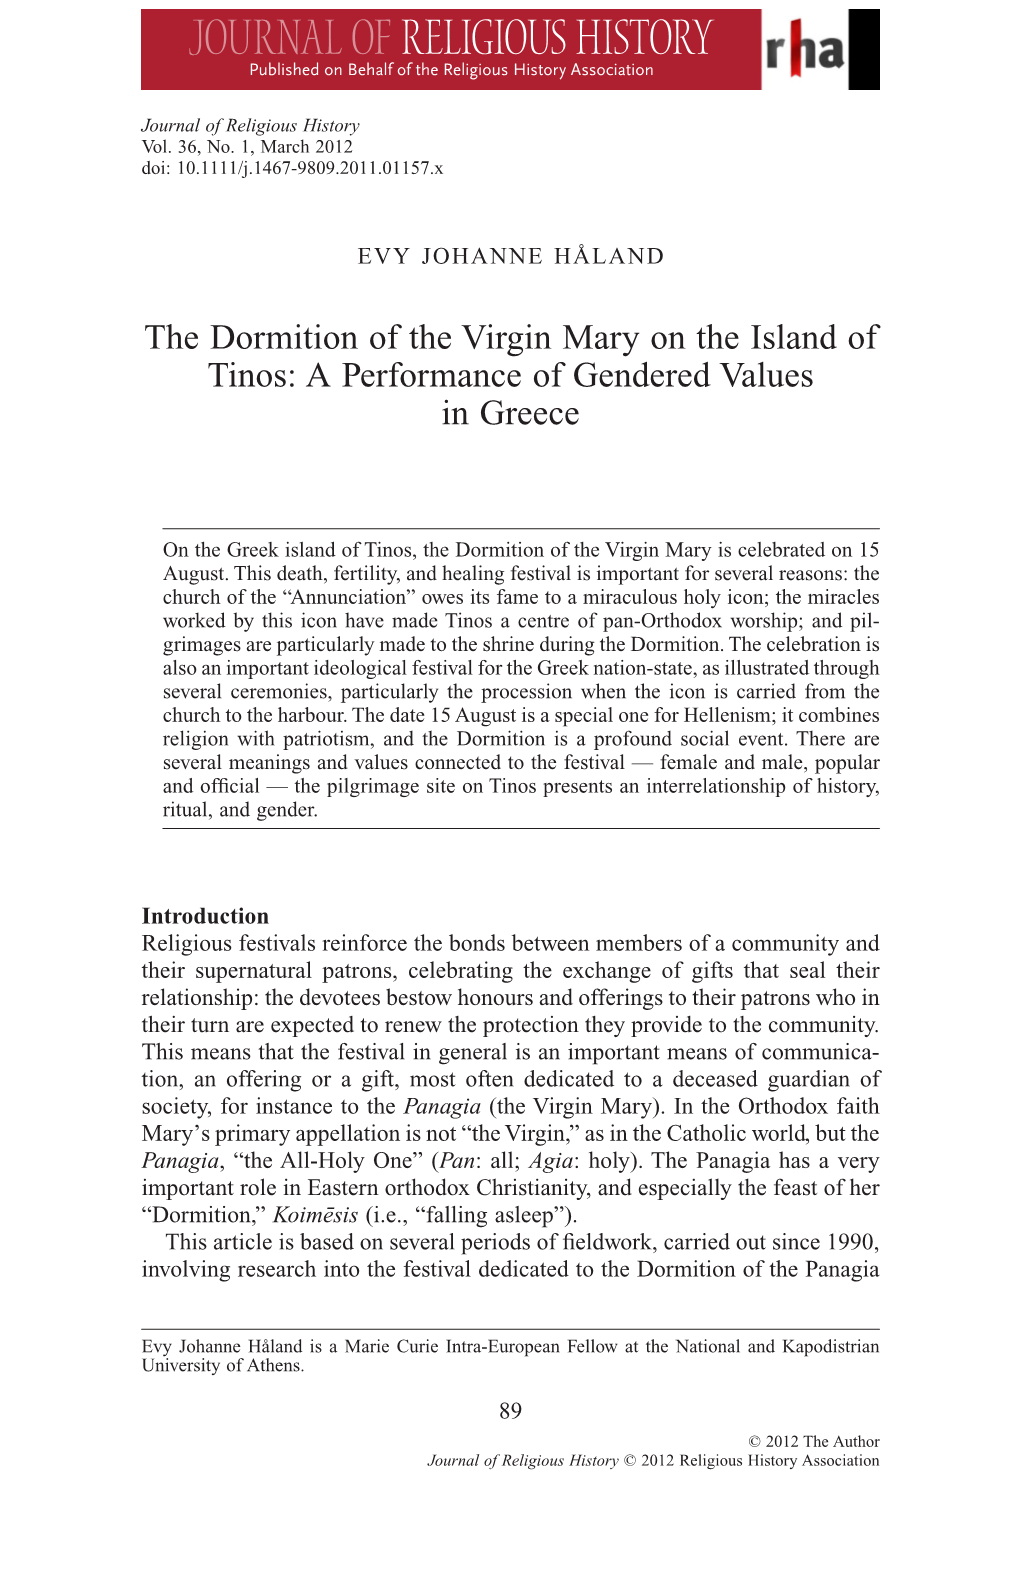 The Dormition of the Virgin Mary on the Island of Tinos: a Performance of Gendered Values in Greece